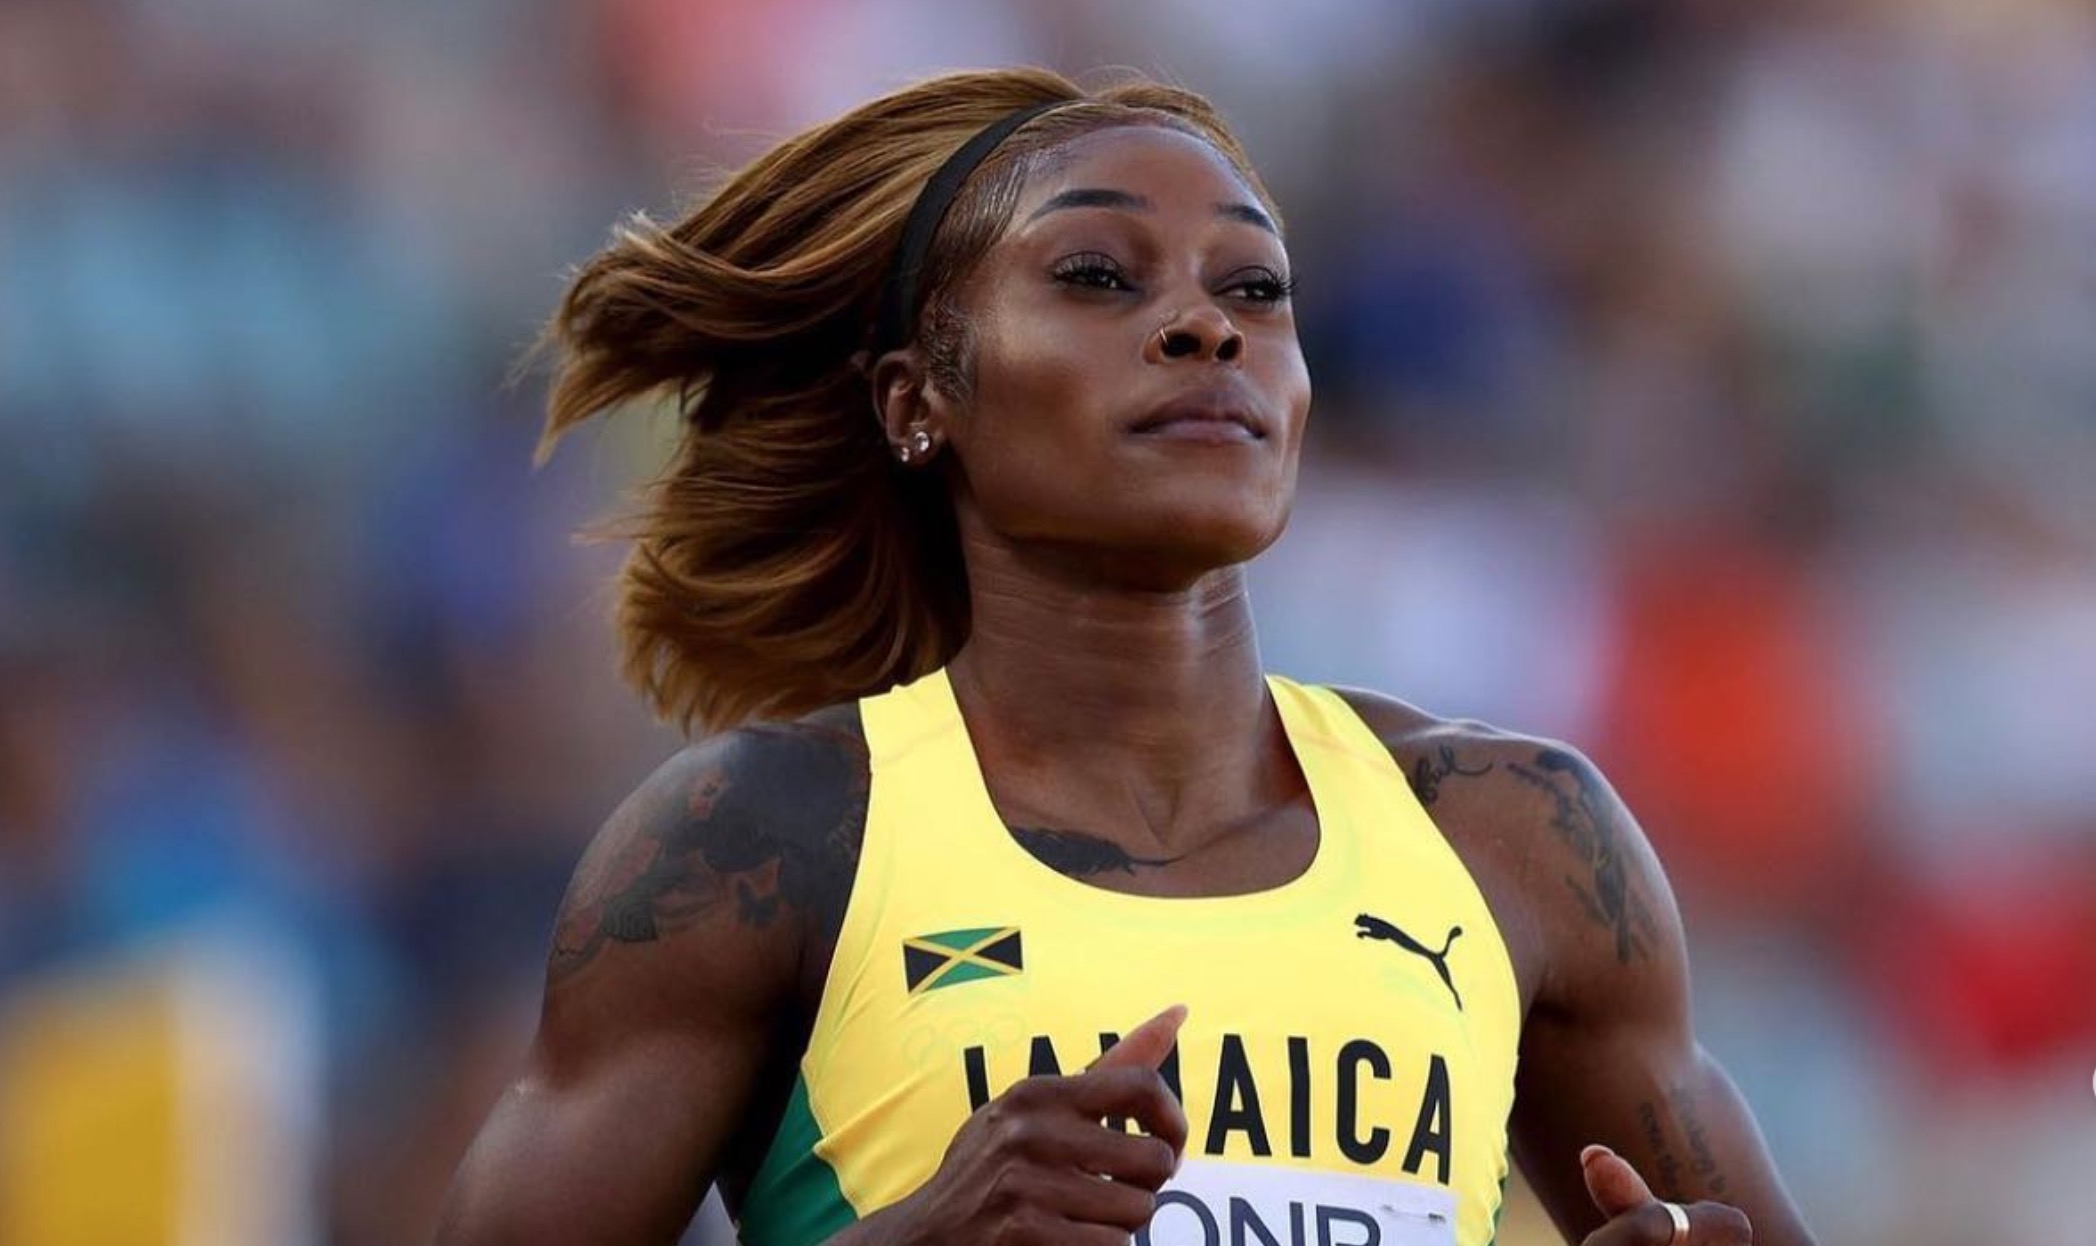 Elaine Thompson-Herah Confident She's The 'Greatest Female Sprinter of All Time' Despite Recent Setbacks Plus Talks New Coach - Watch Interview